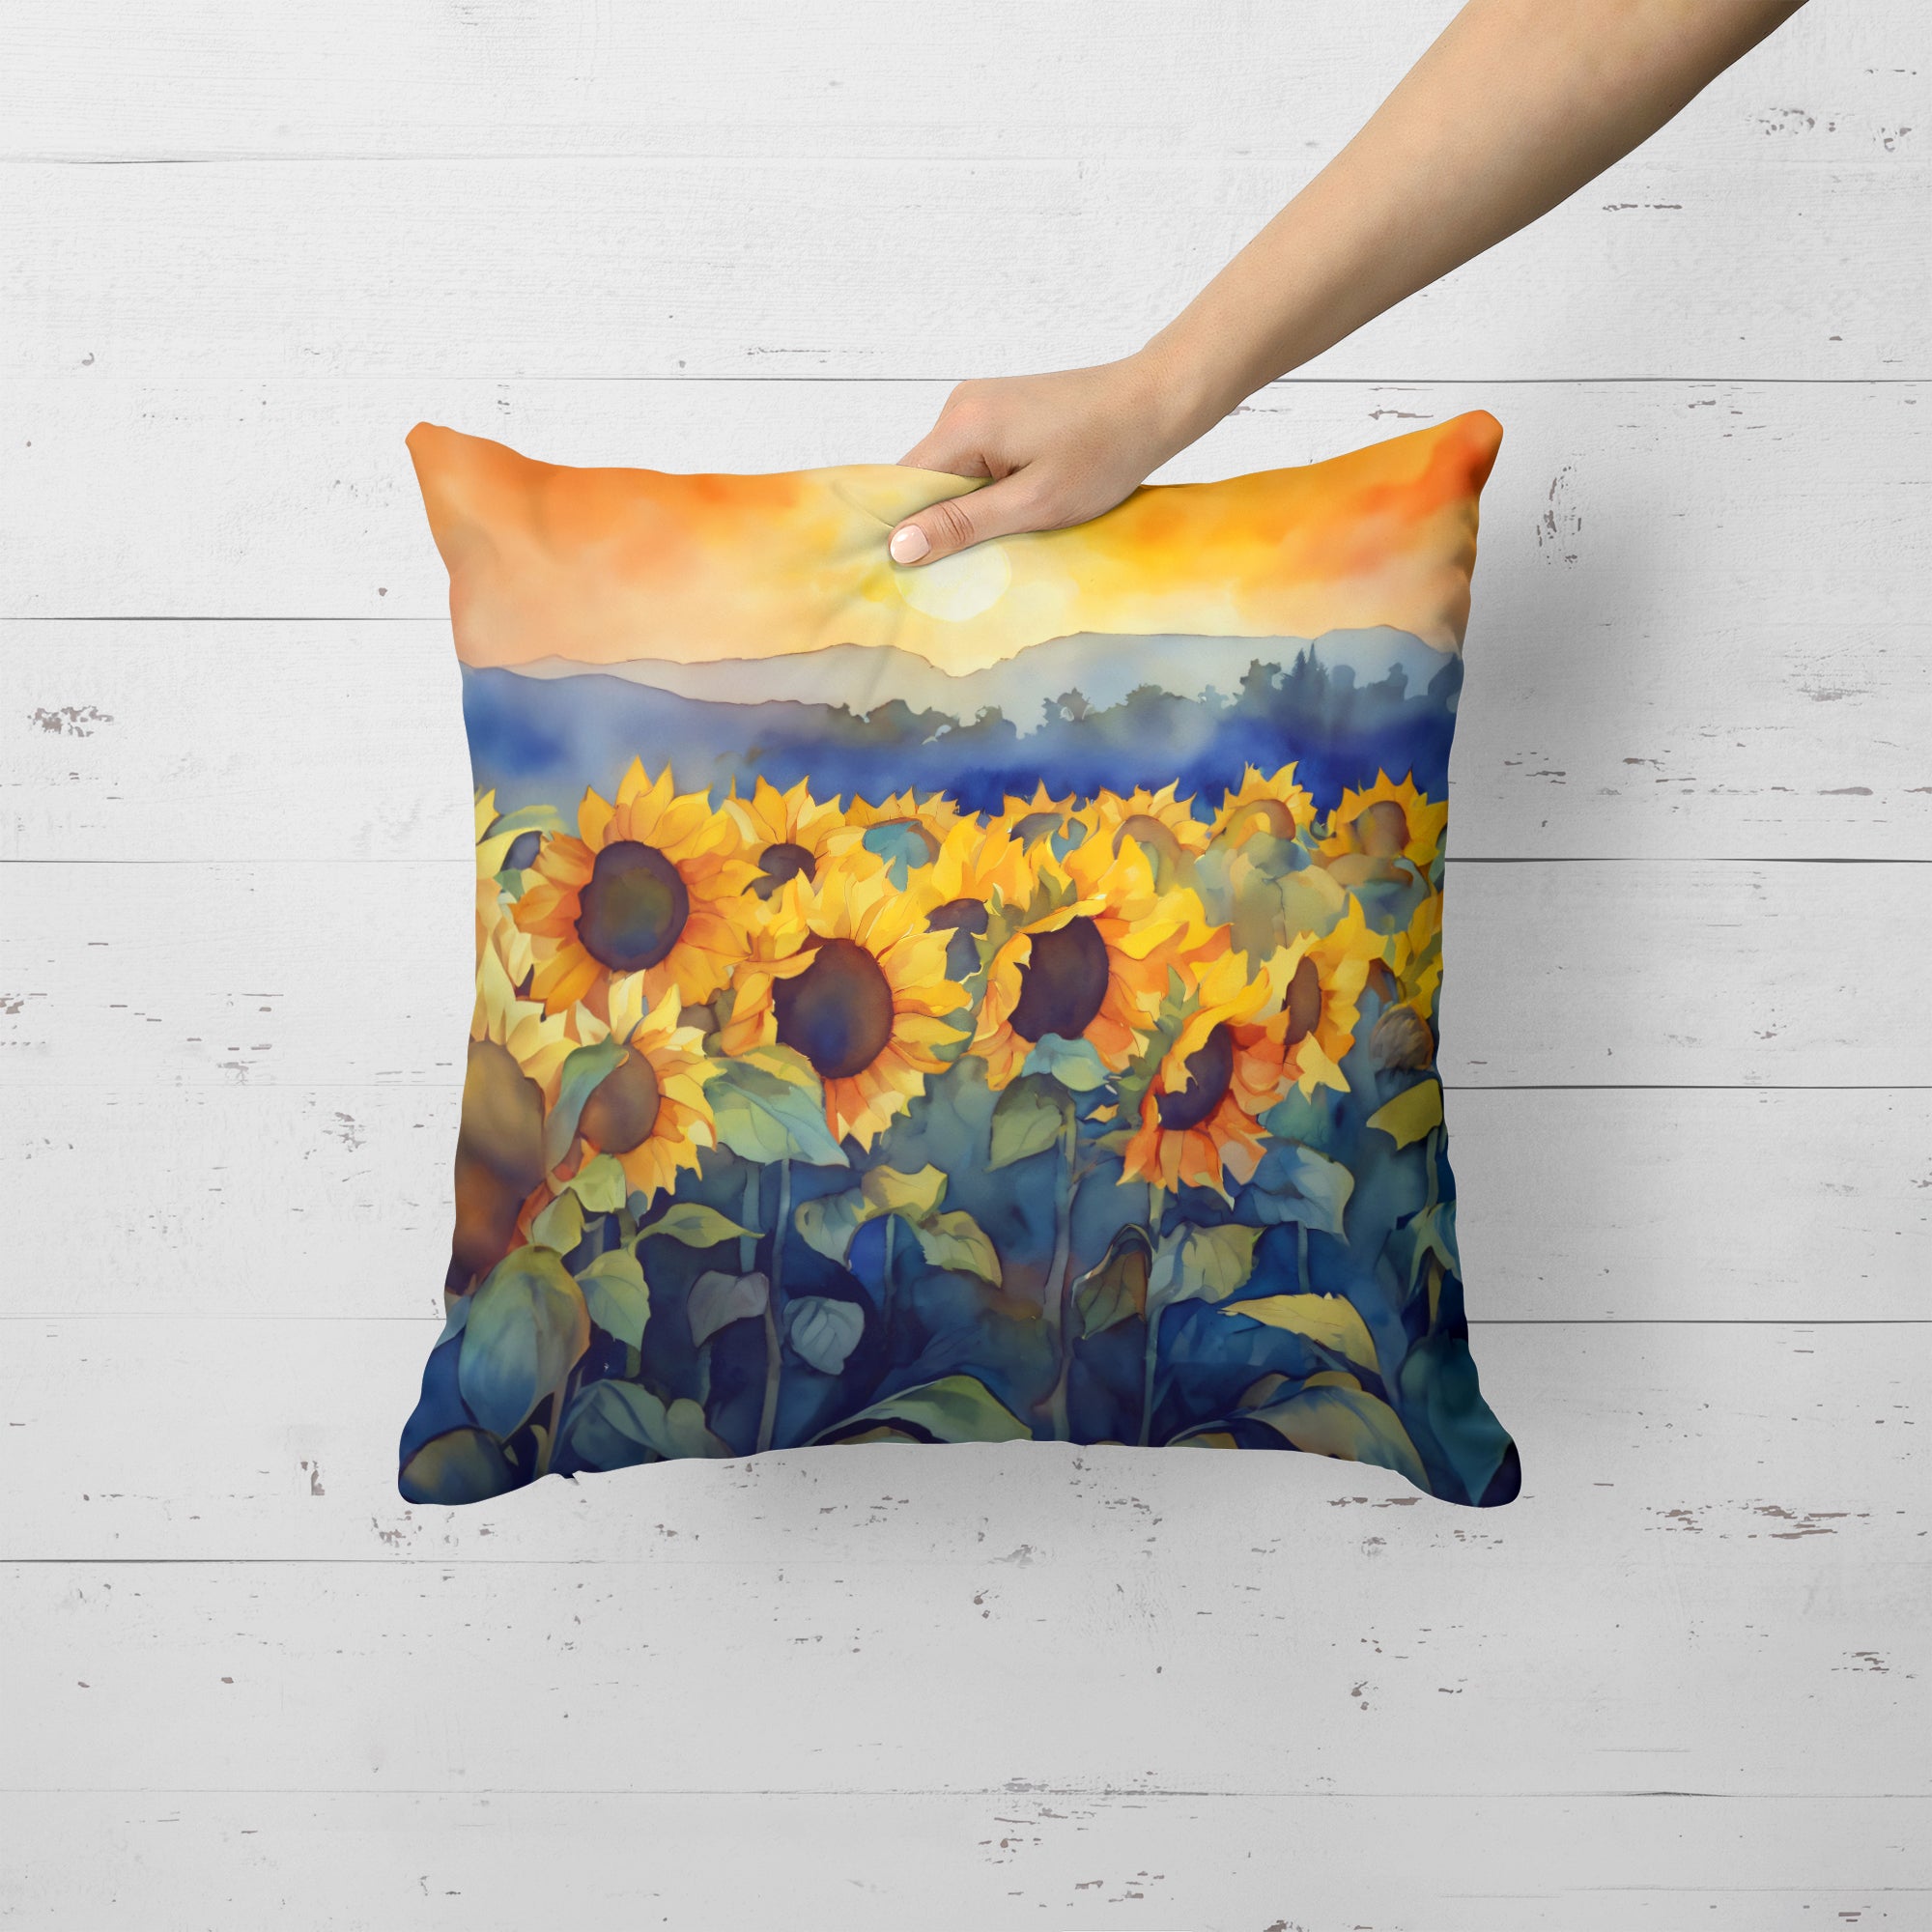 Buy this Sunflowers in Watercolor Throw Pillow